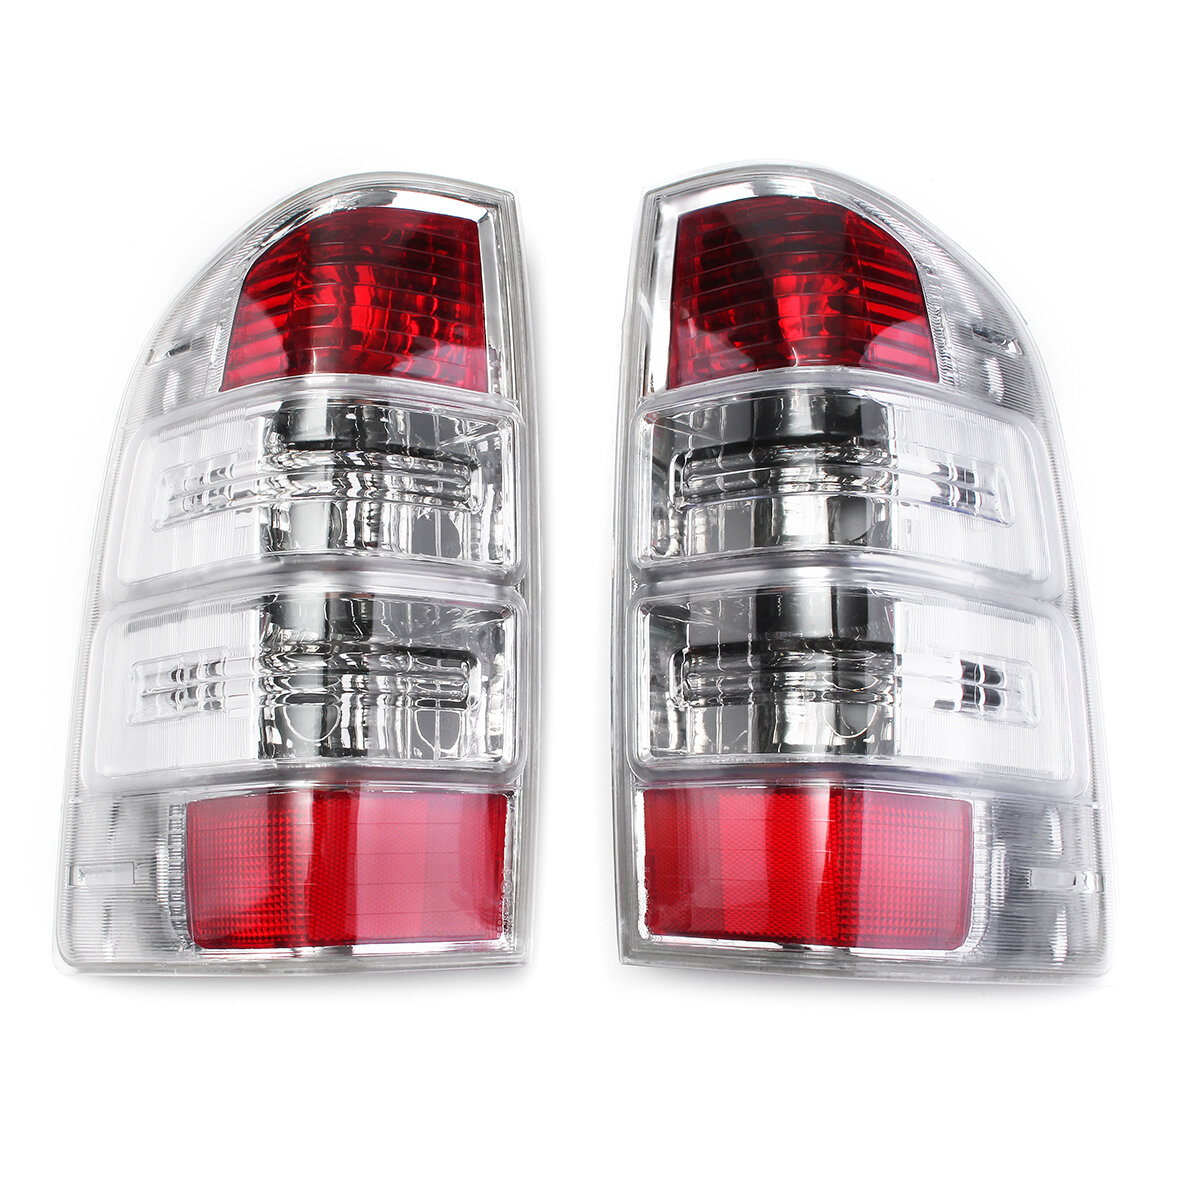 Car Left/Right Rear Tail Light Assembly Lamp with No Bulb for Ford Ranger Pickup Ute 2008-2011